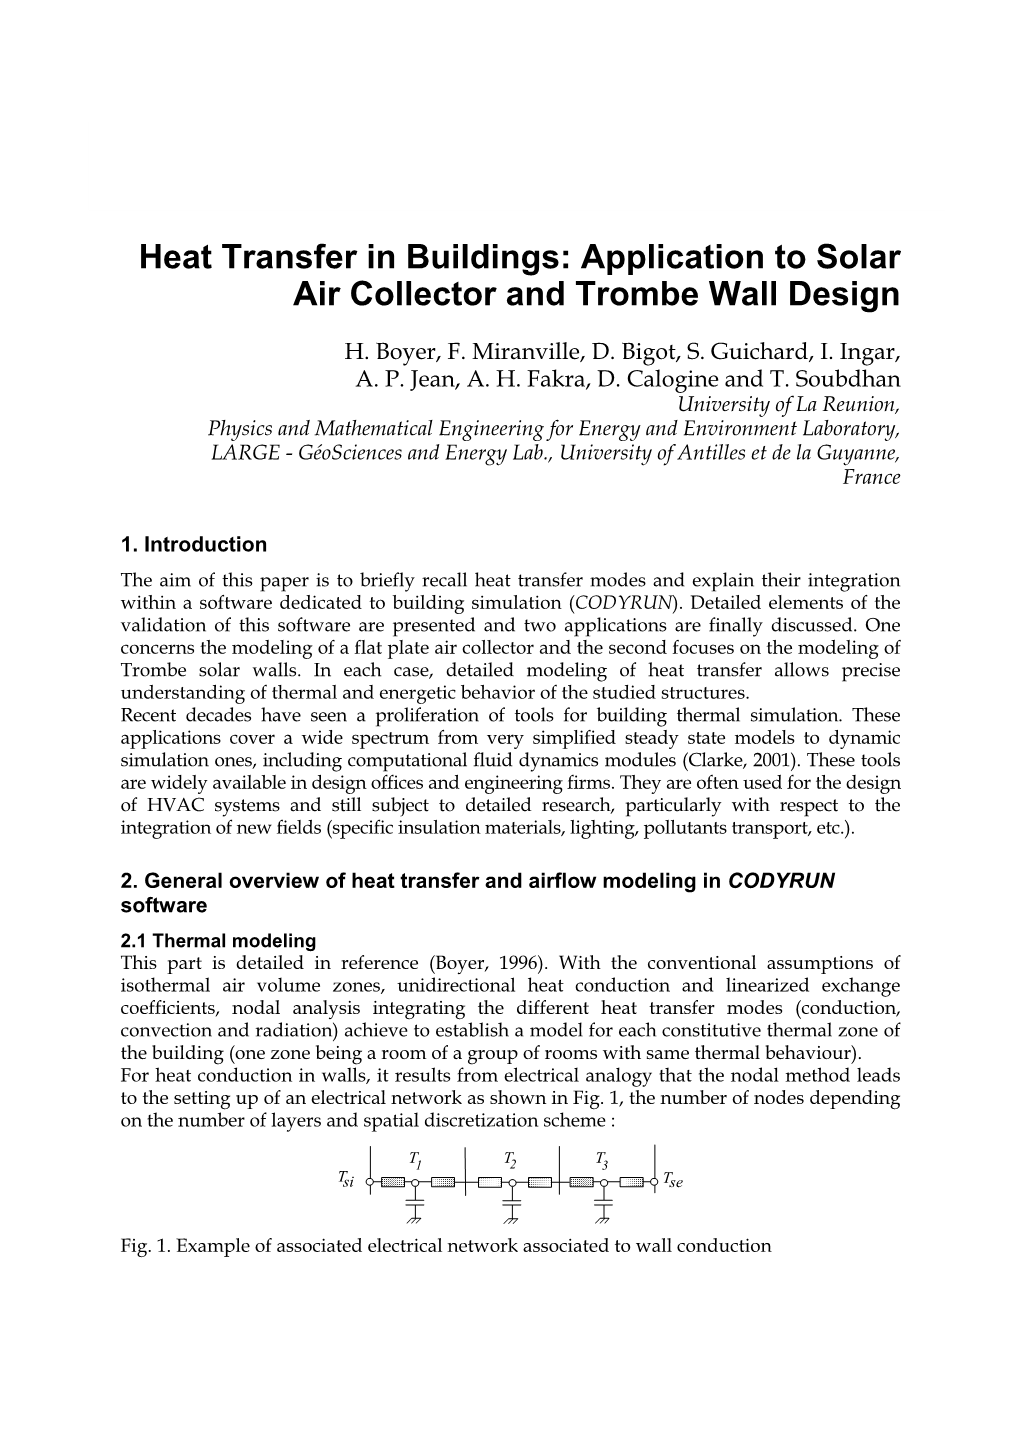 Heat Transfer in Buildings: Application to Solar Air Collector and Trombe Wall Design